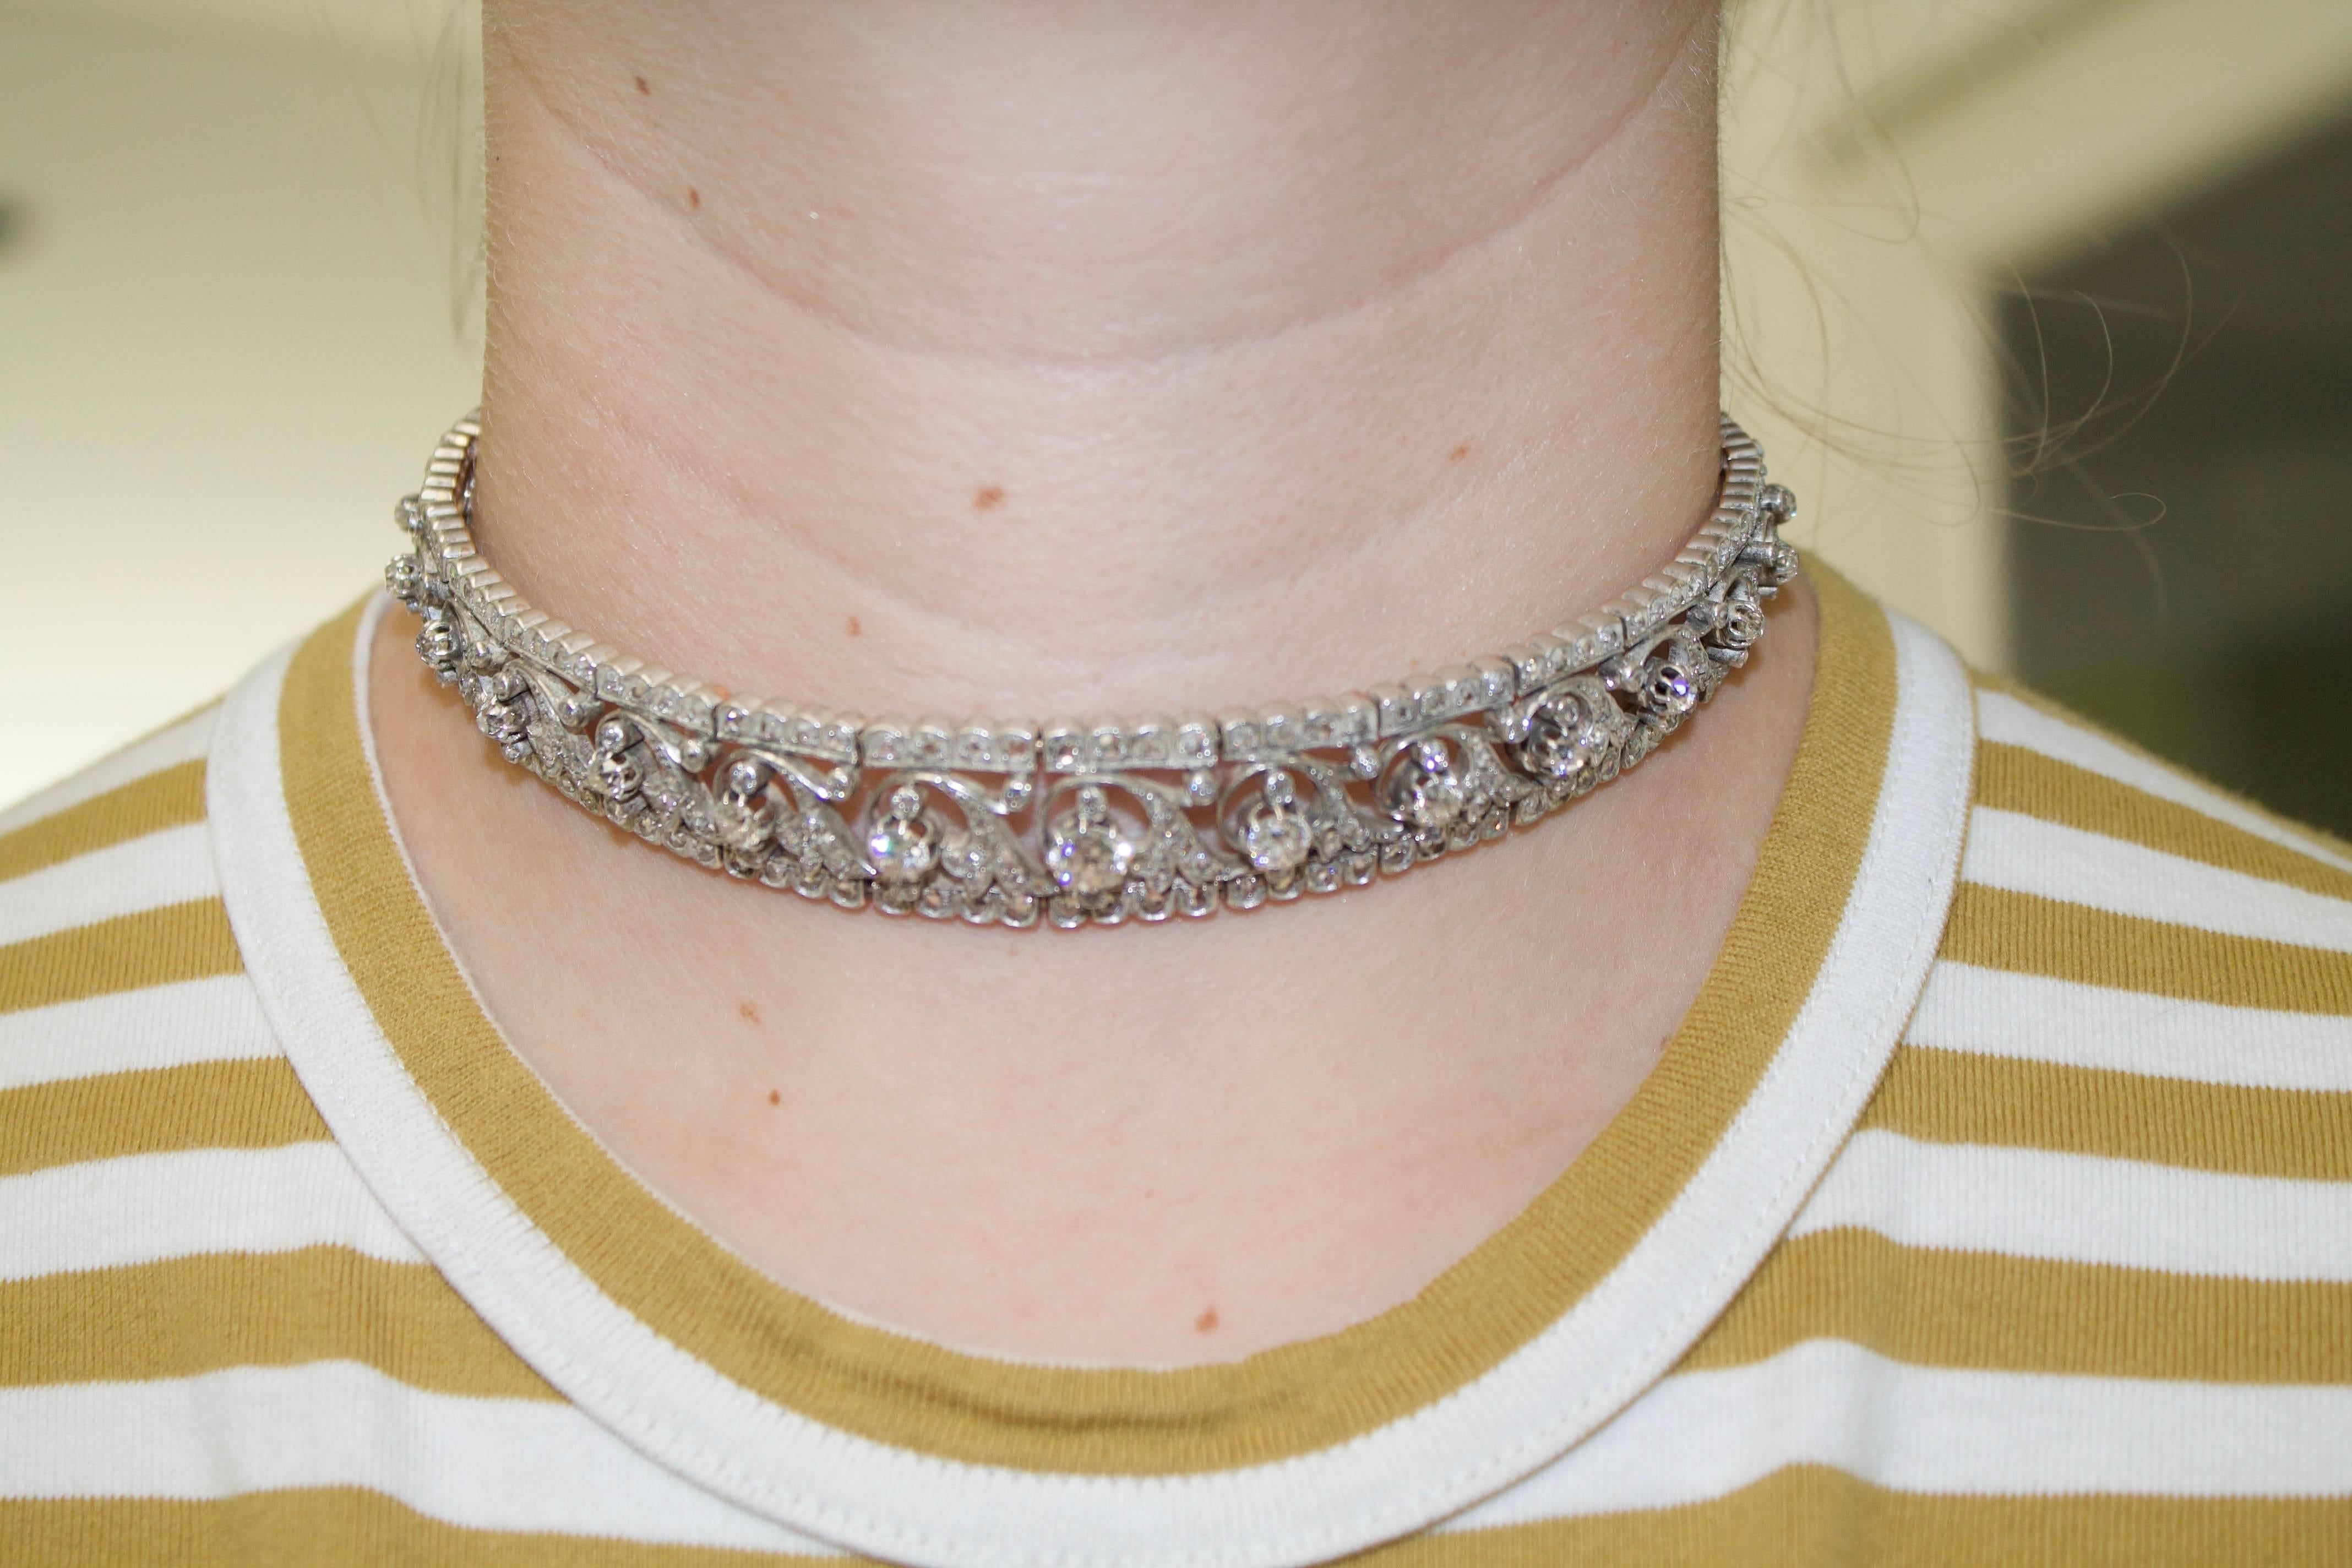 Victorian Choker-Bracelet Combination Convertible 18k Gold and Silver Circa 1890 
It's Two! Two Pieces in One!
An Elegant Choker and a Stunning Bracelet

One Old Mine Cut Diamond weighing 1.00 approximately
Fifteen Old Mine Cut Diamonds weighing